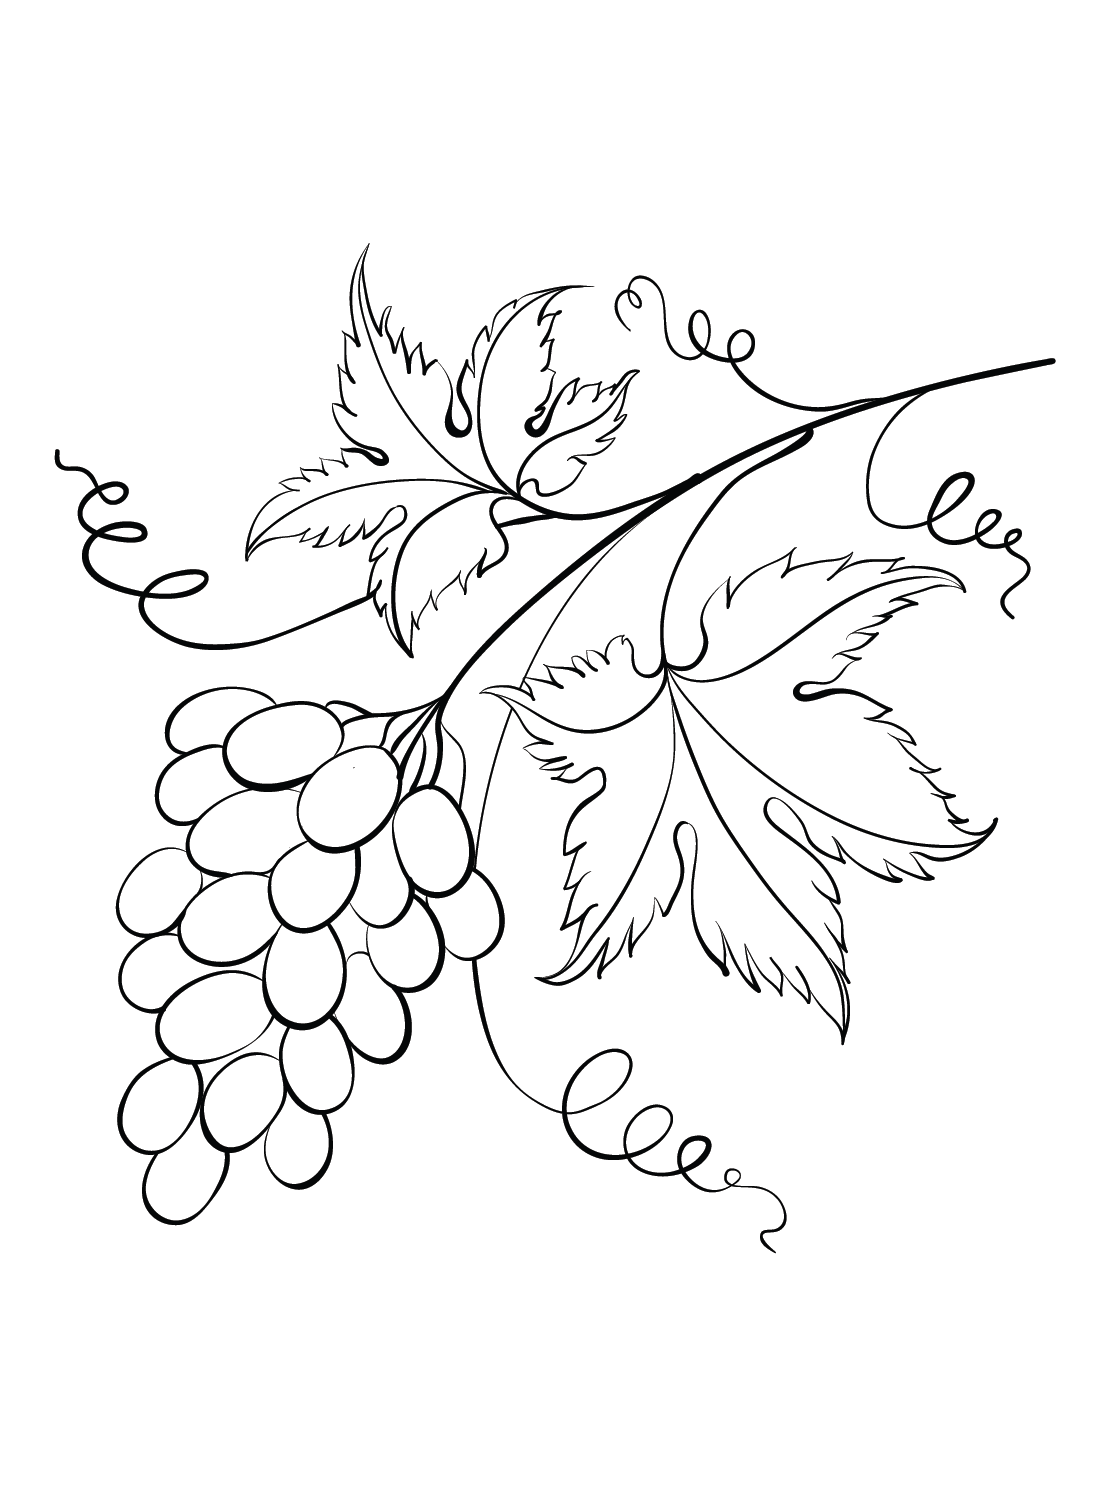 Grapes for Kids Coloring Page